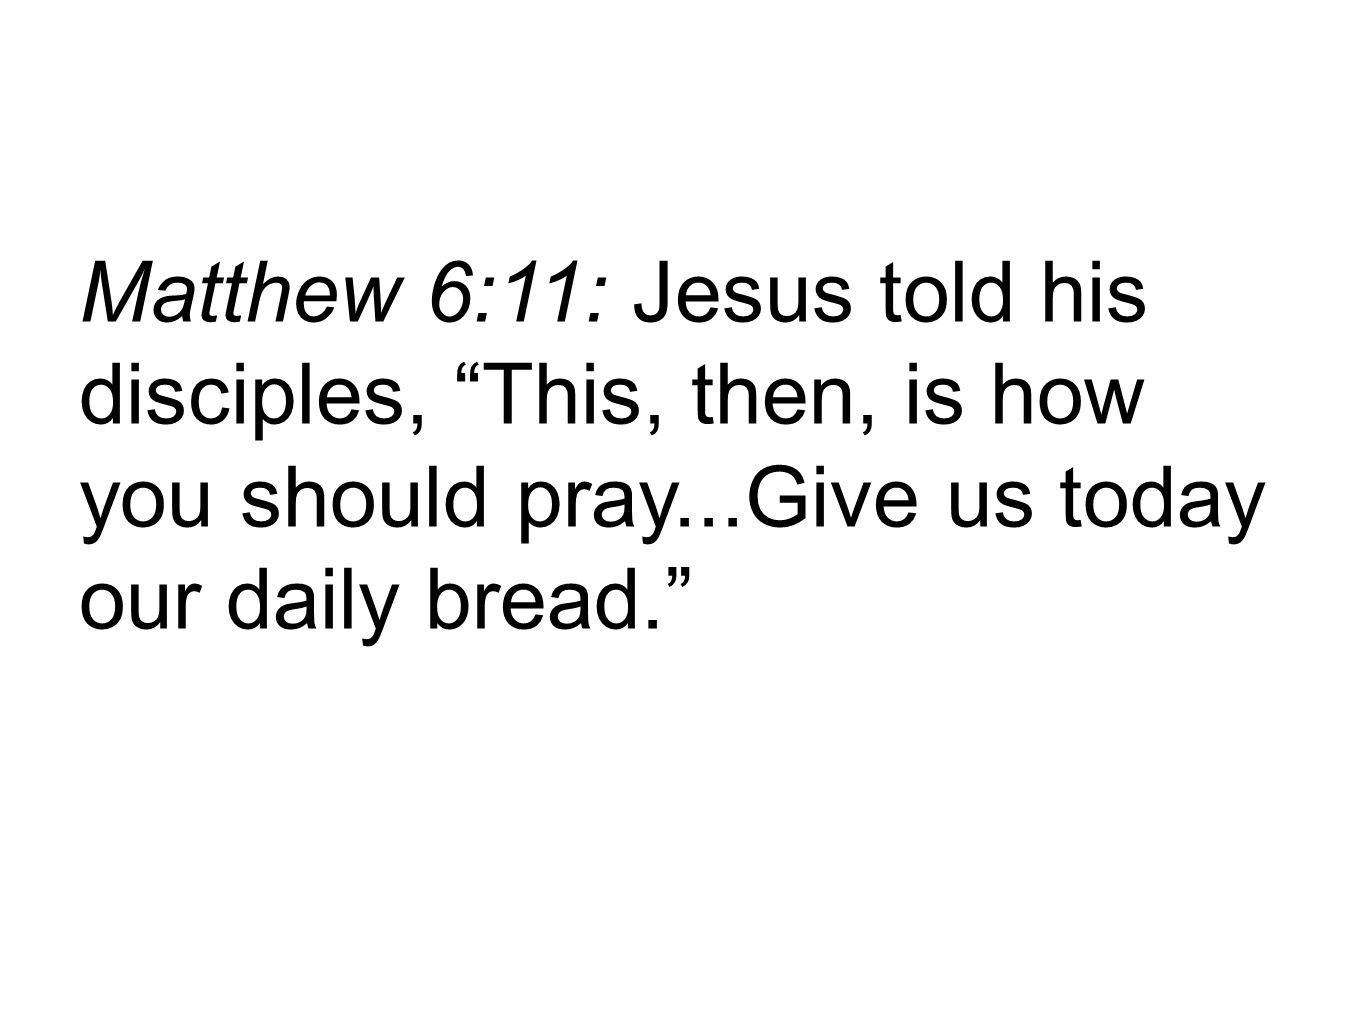 Matthew 6:11: Jesus told his disciples, This, then, is how you should pray...Give us today our daily bread.